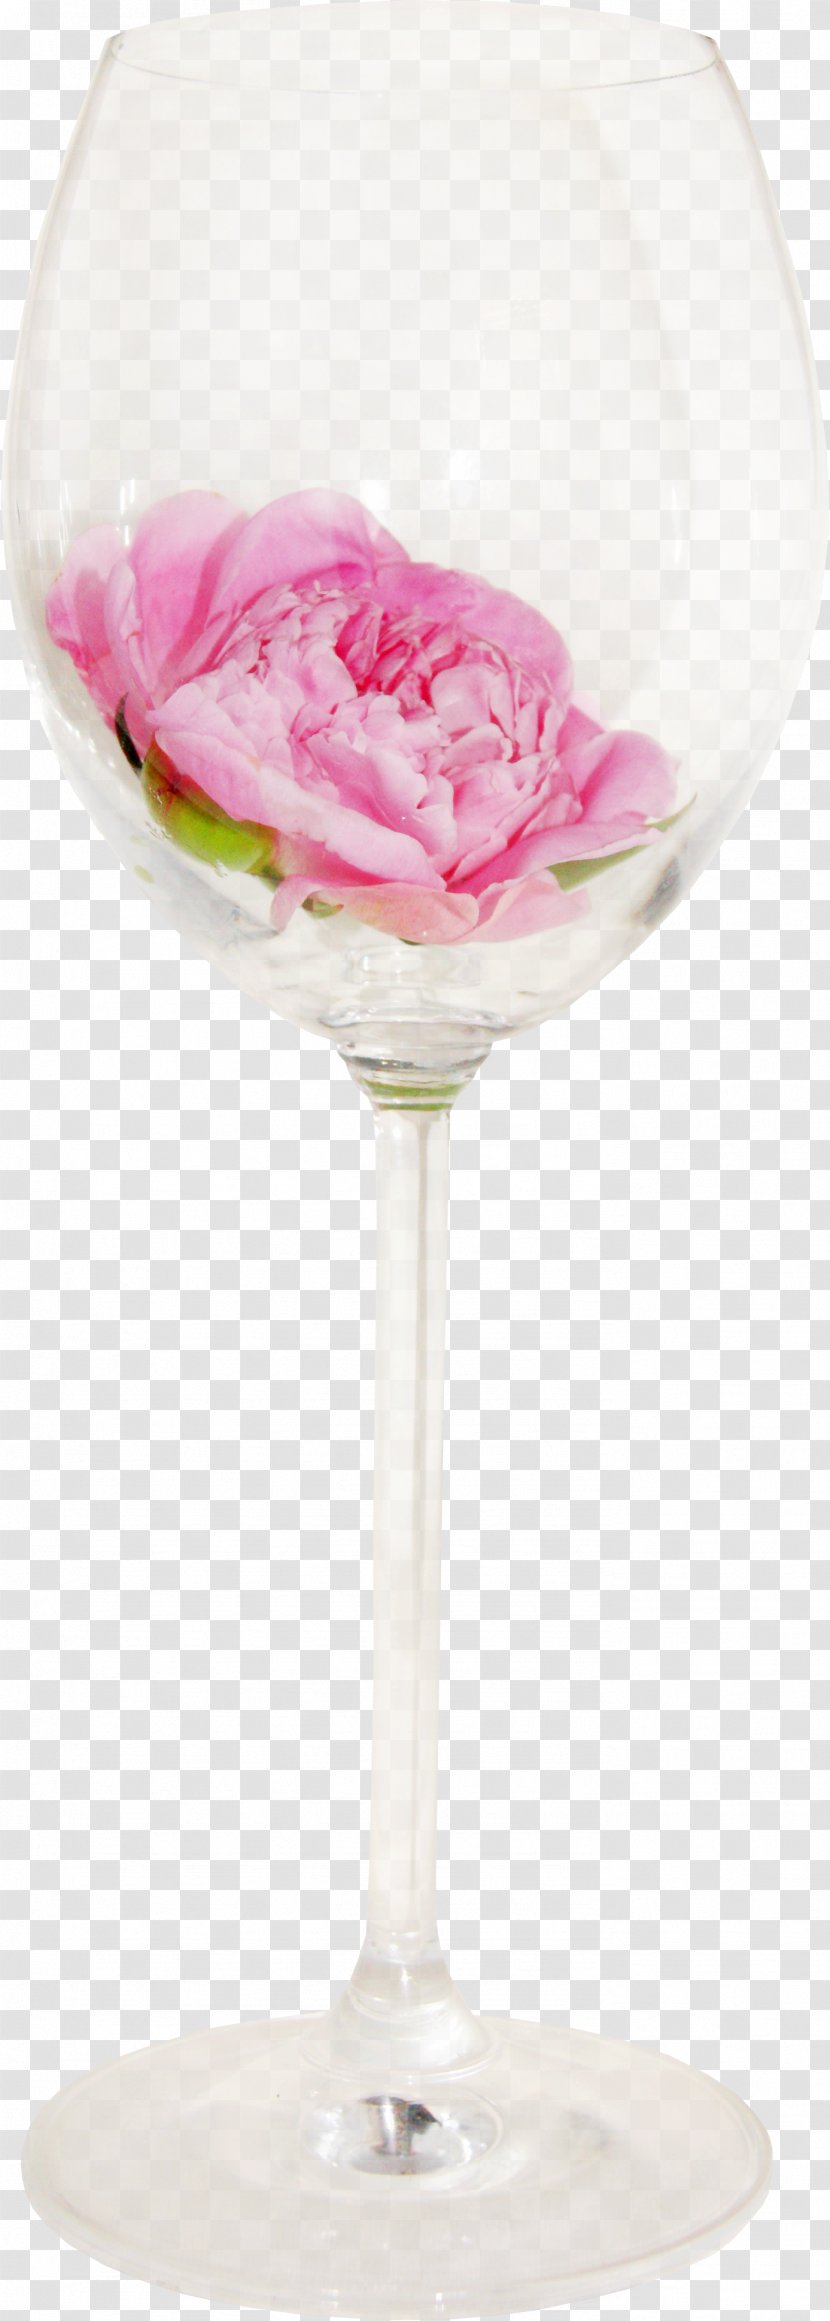 Wine Glass Cup - Flower - Flowers Transparent PNG